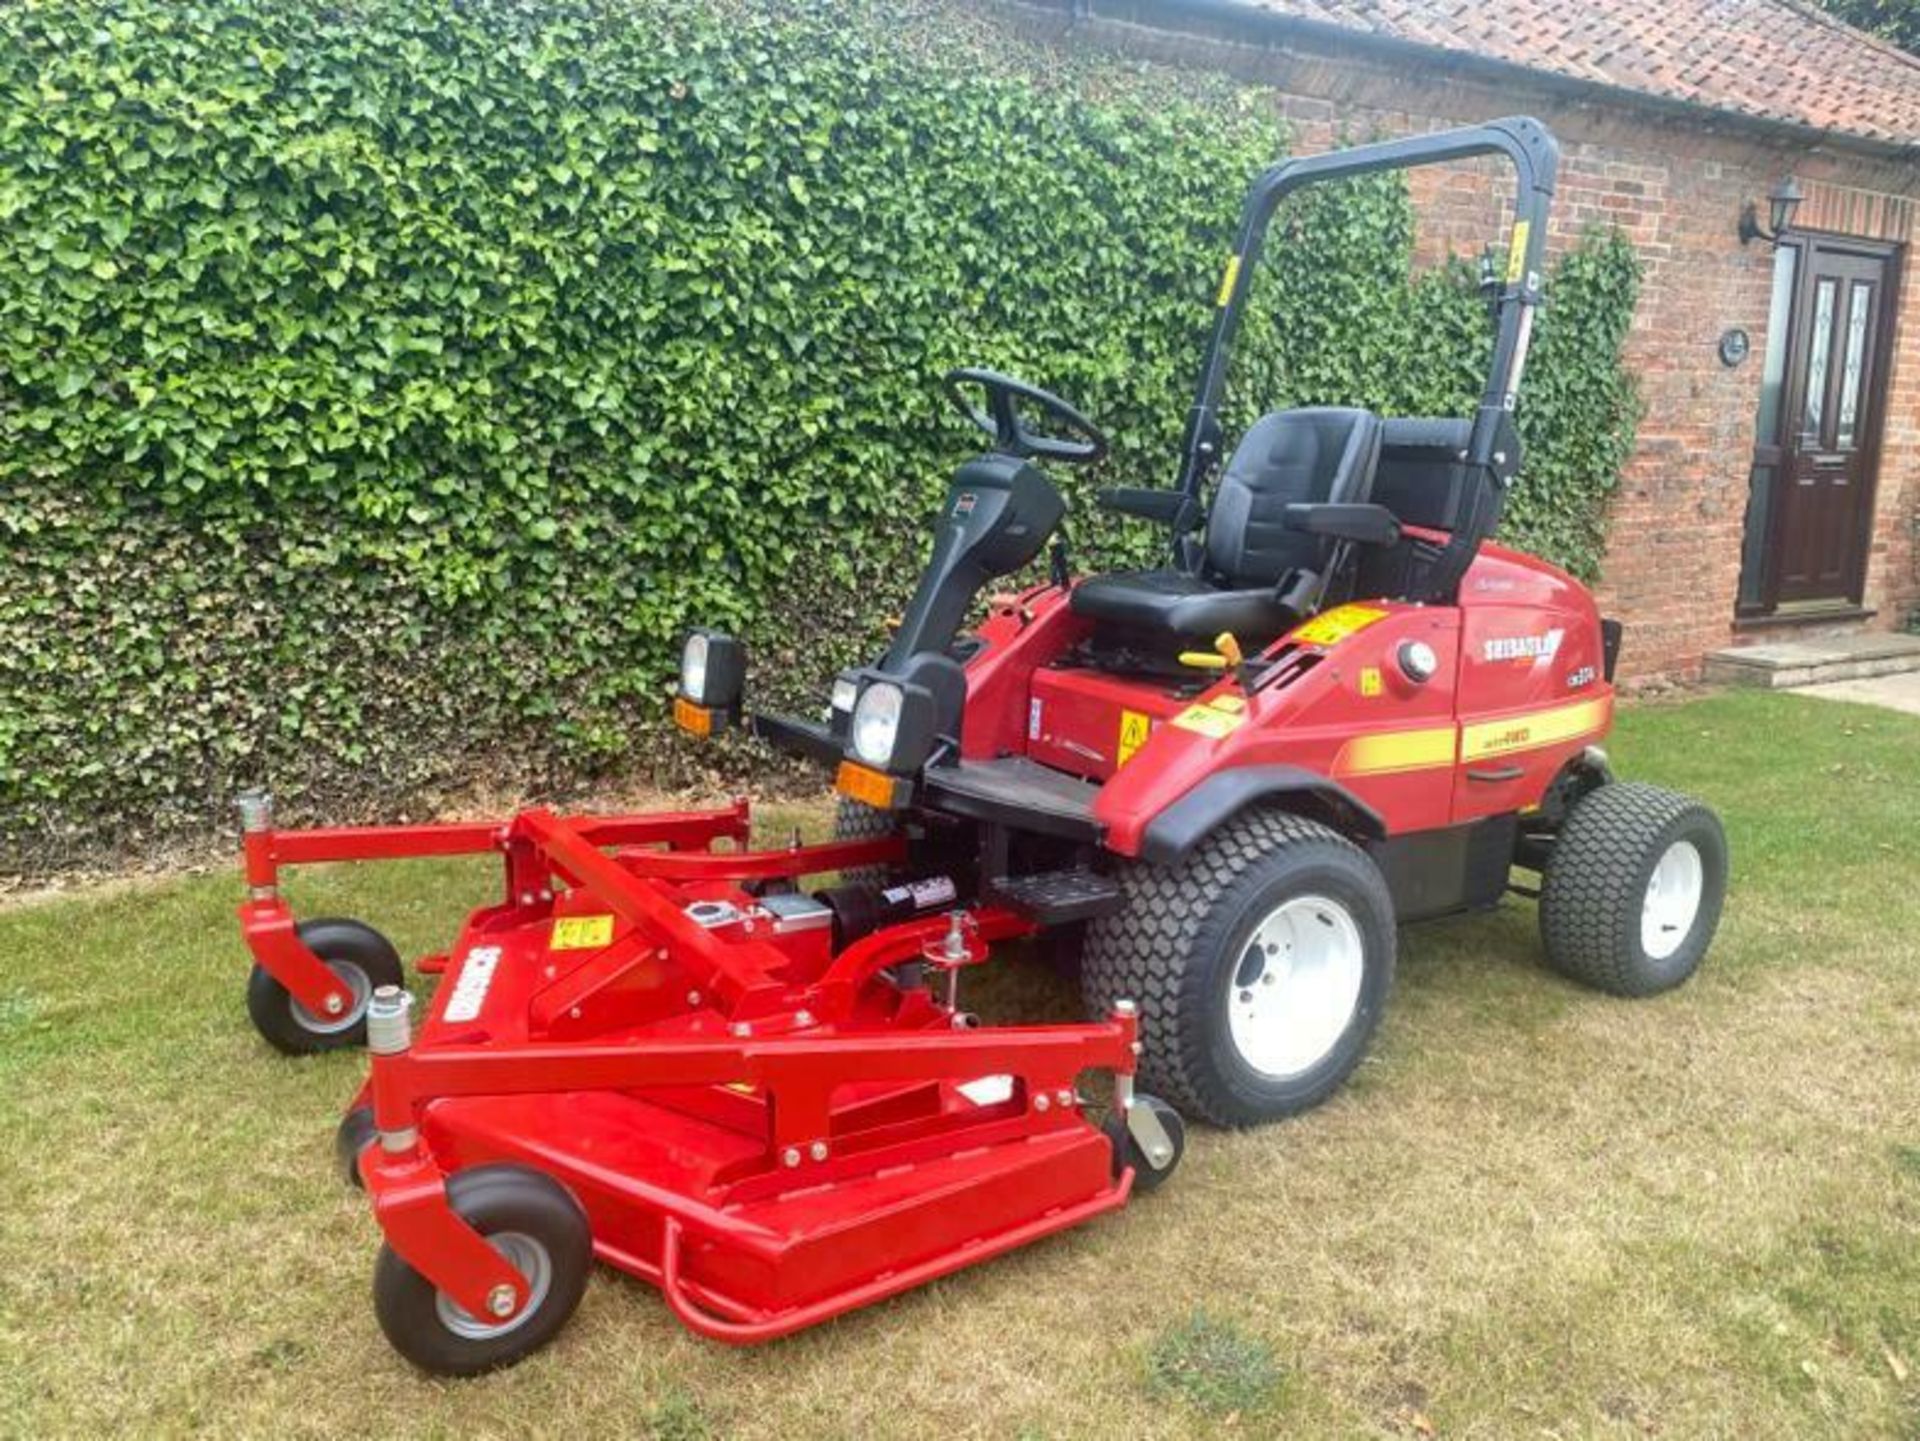 SHIBAURA CM374 UPFRONT ROTARY MOWER, 37HP, BRAND NEW 60" CUT DECK NEVER USED, DIESEL, YEAR 2014